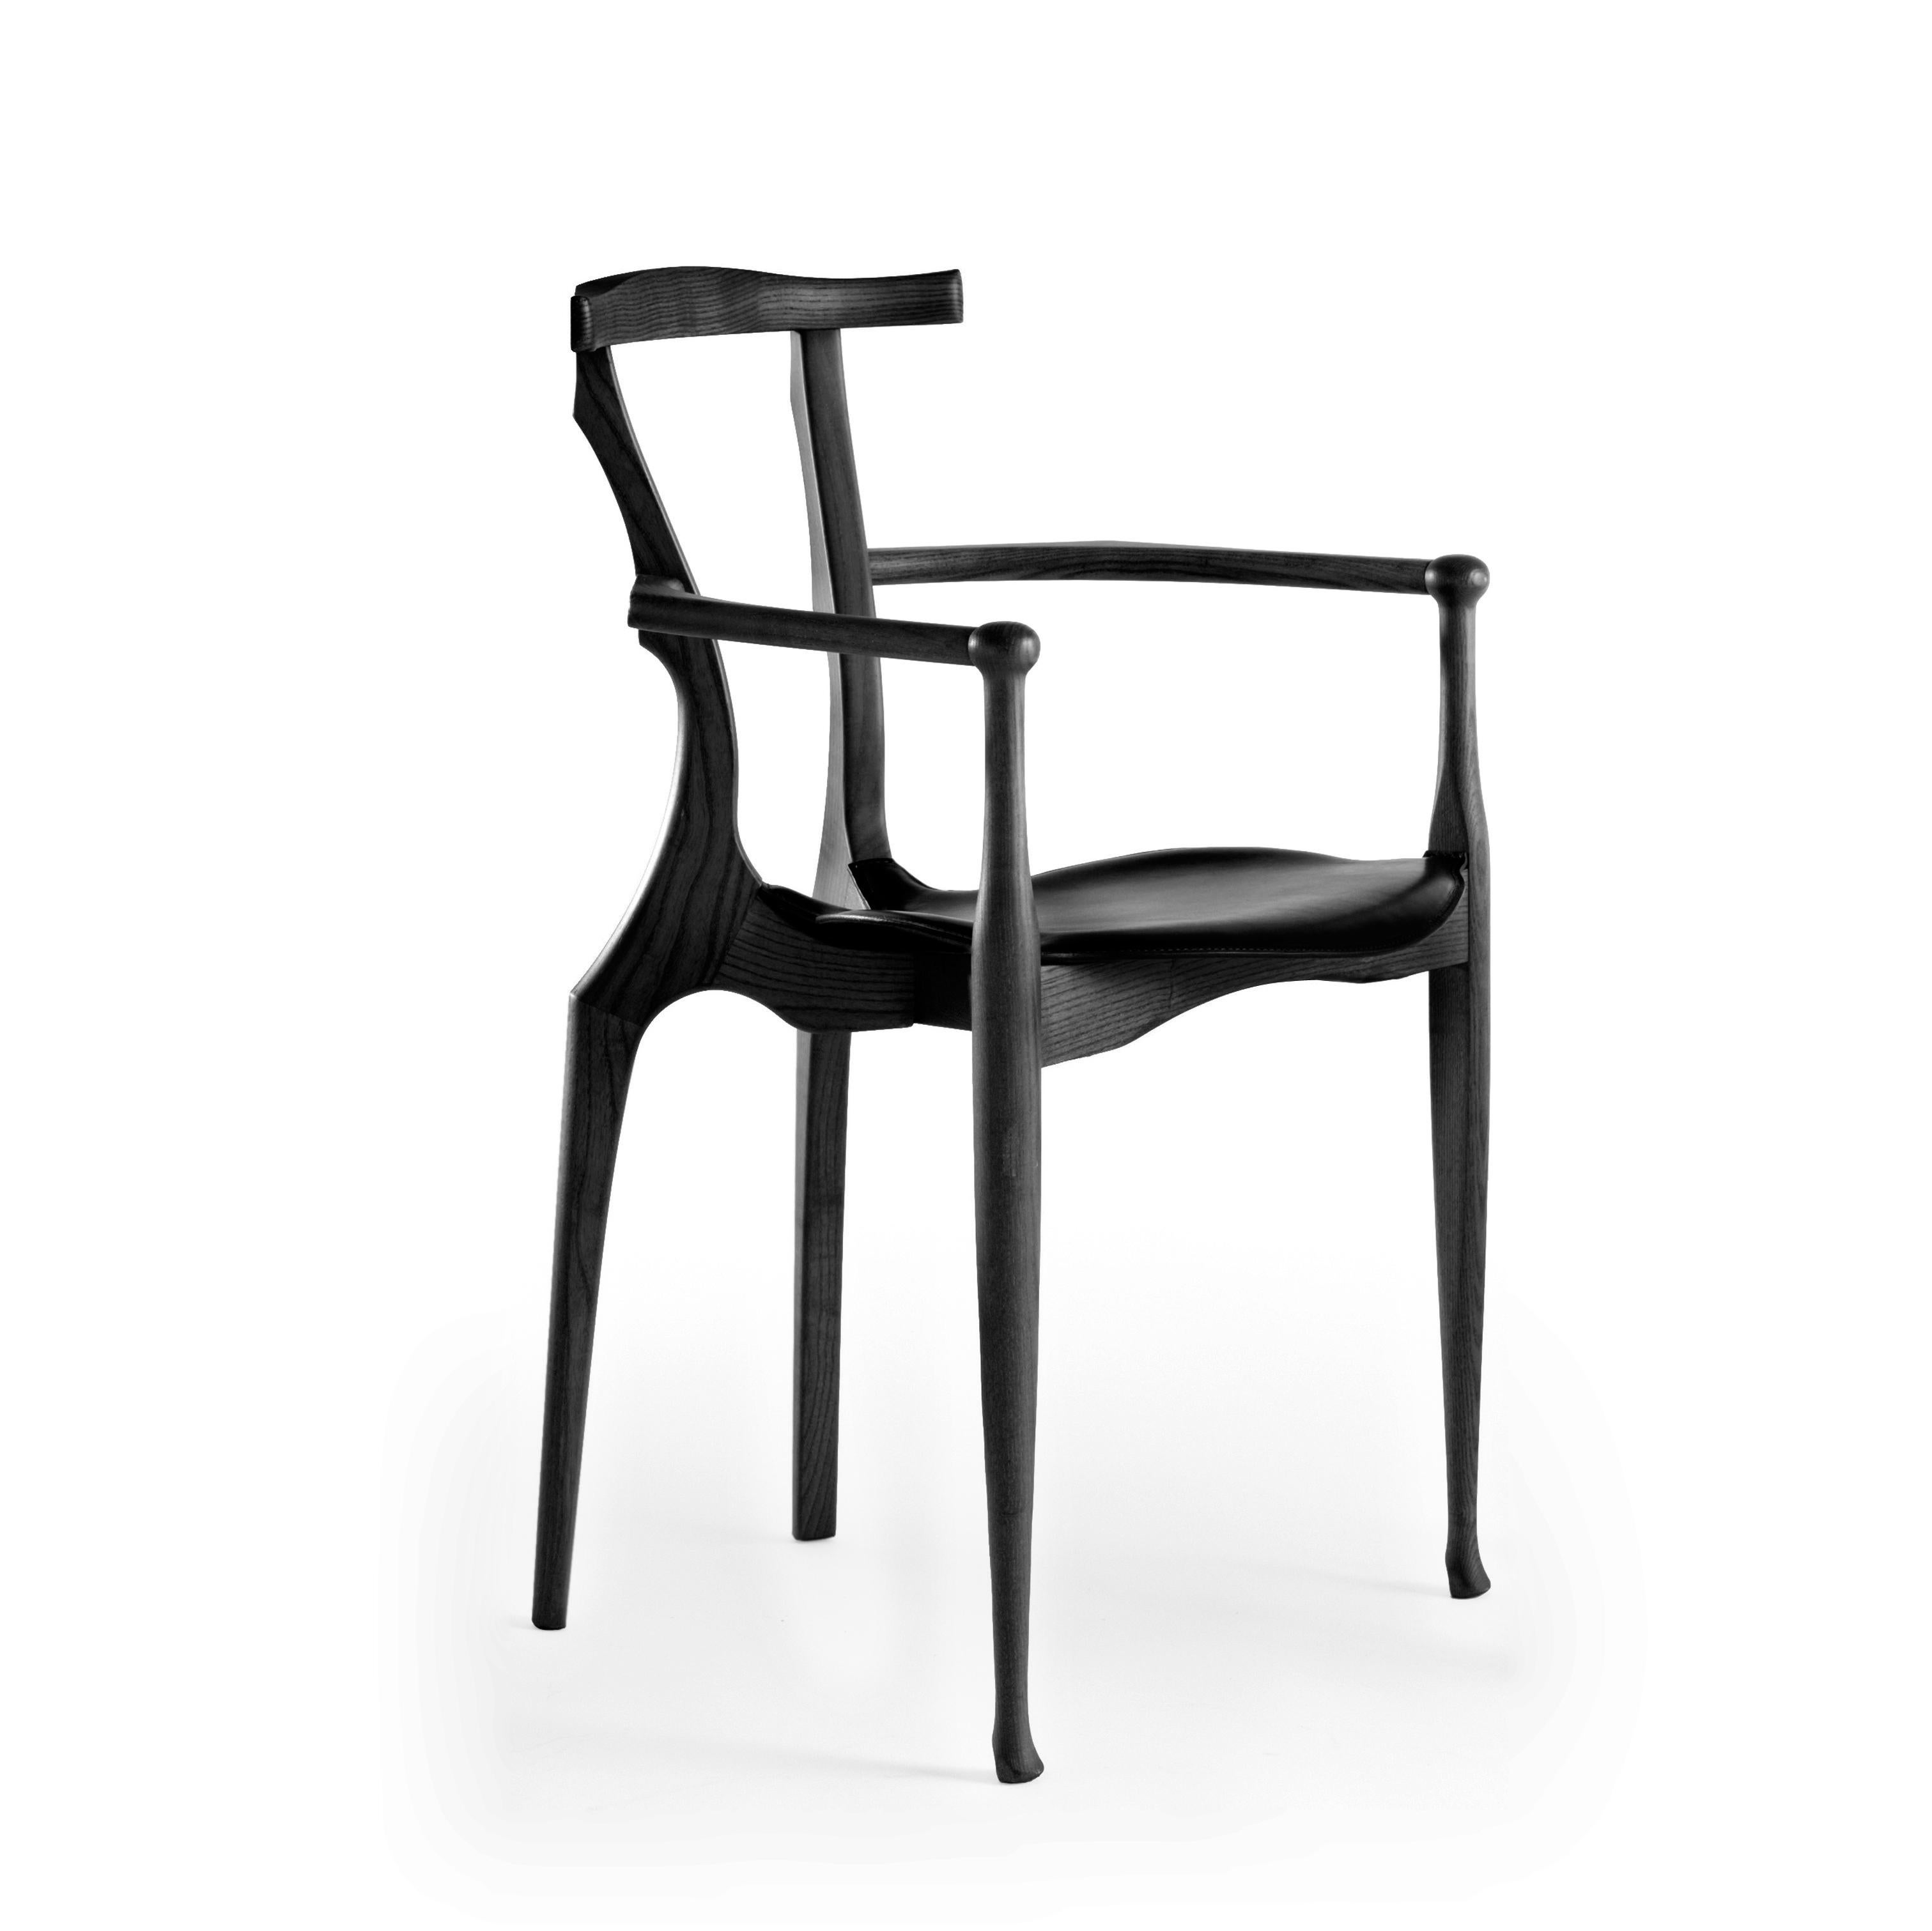 Solid ash lacquered in black with seat inn black hide
Set of four.

Gaulino chair designed by Oscar Tusquets manufactured by BD Barcelona Design, circa 2010.

Gaulino chair which, designed in 1987, was selected for the Industrial Design prize